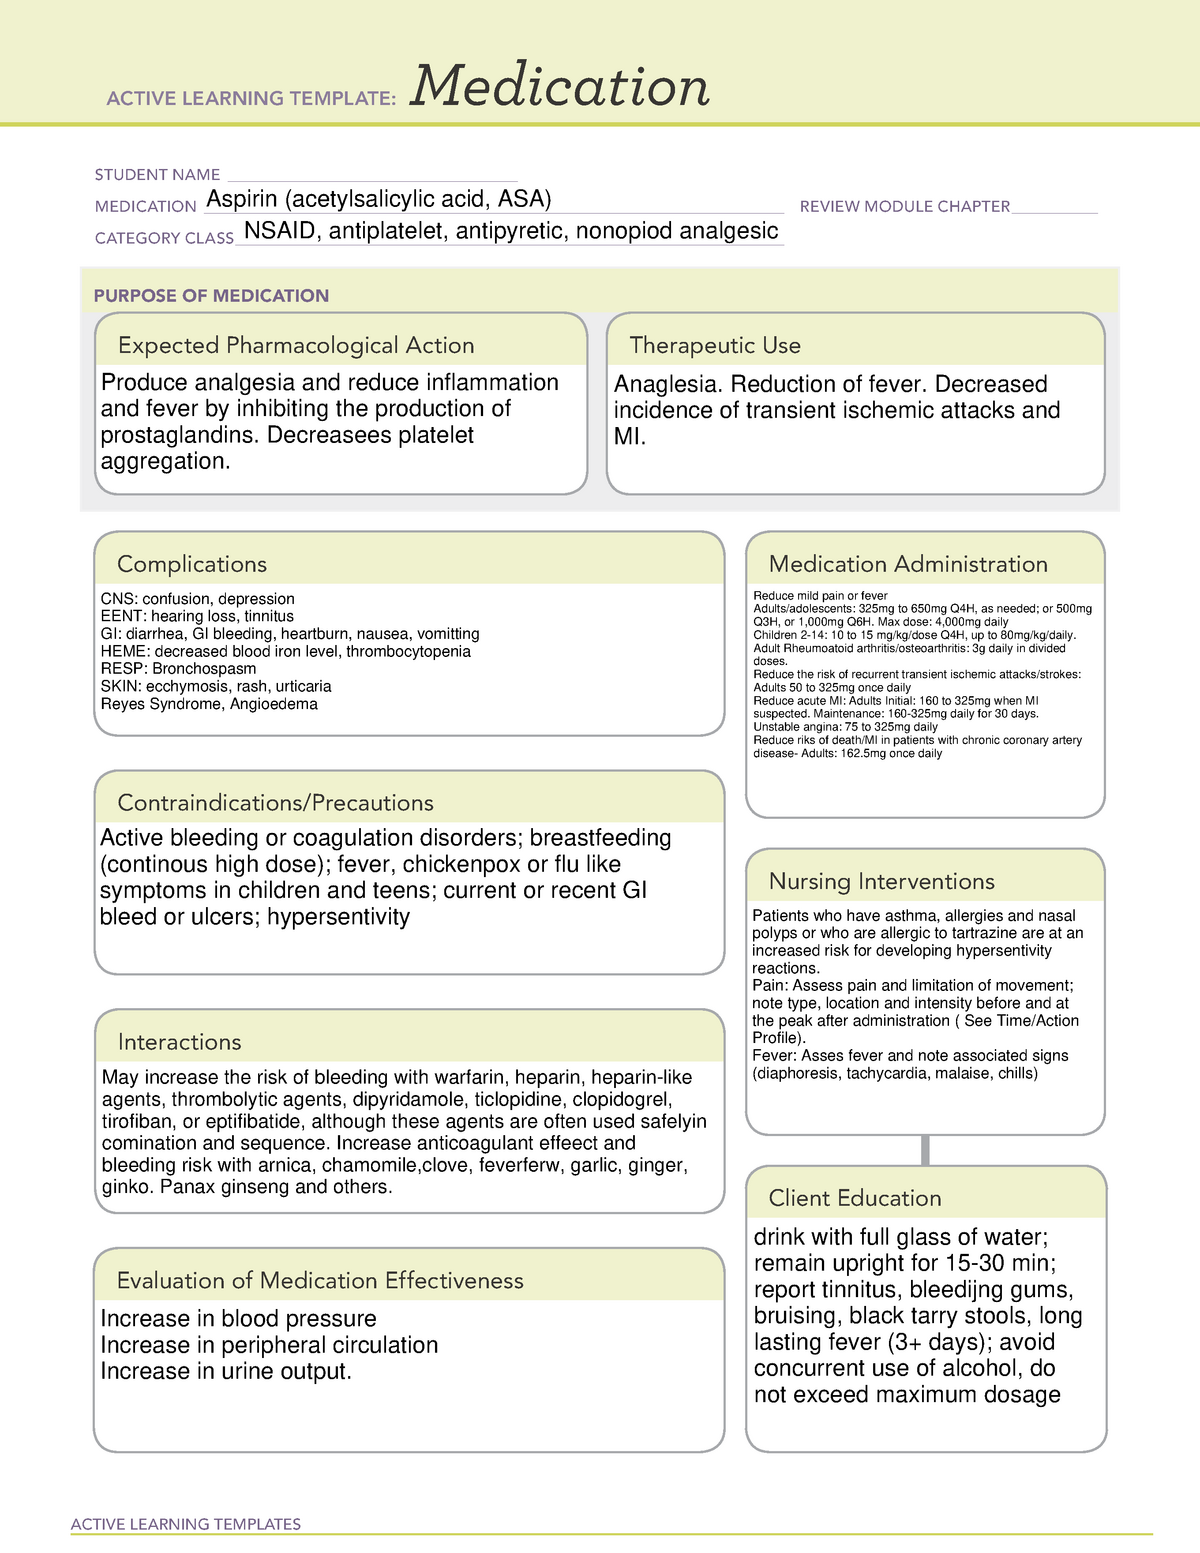 Med Card- aspirin - Med Cards - ACTIVE LEARNING TEMPLATES Throughout Med Cards Template